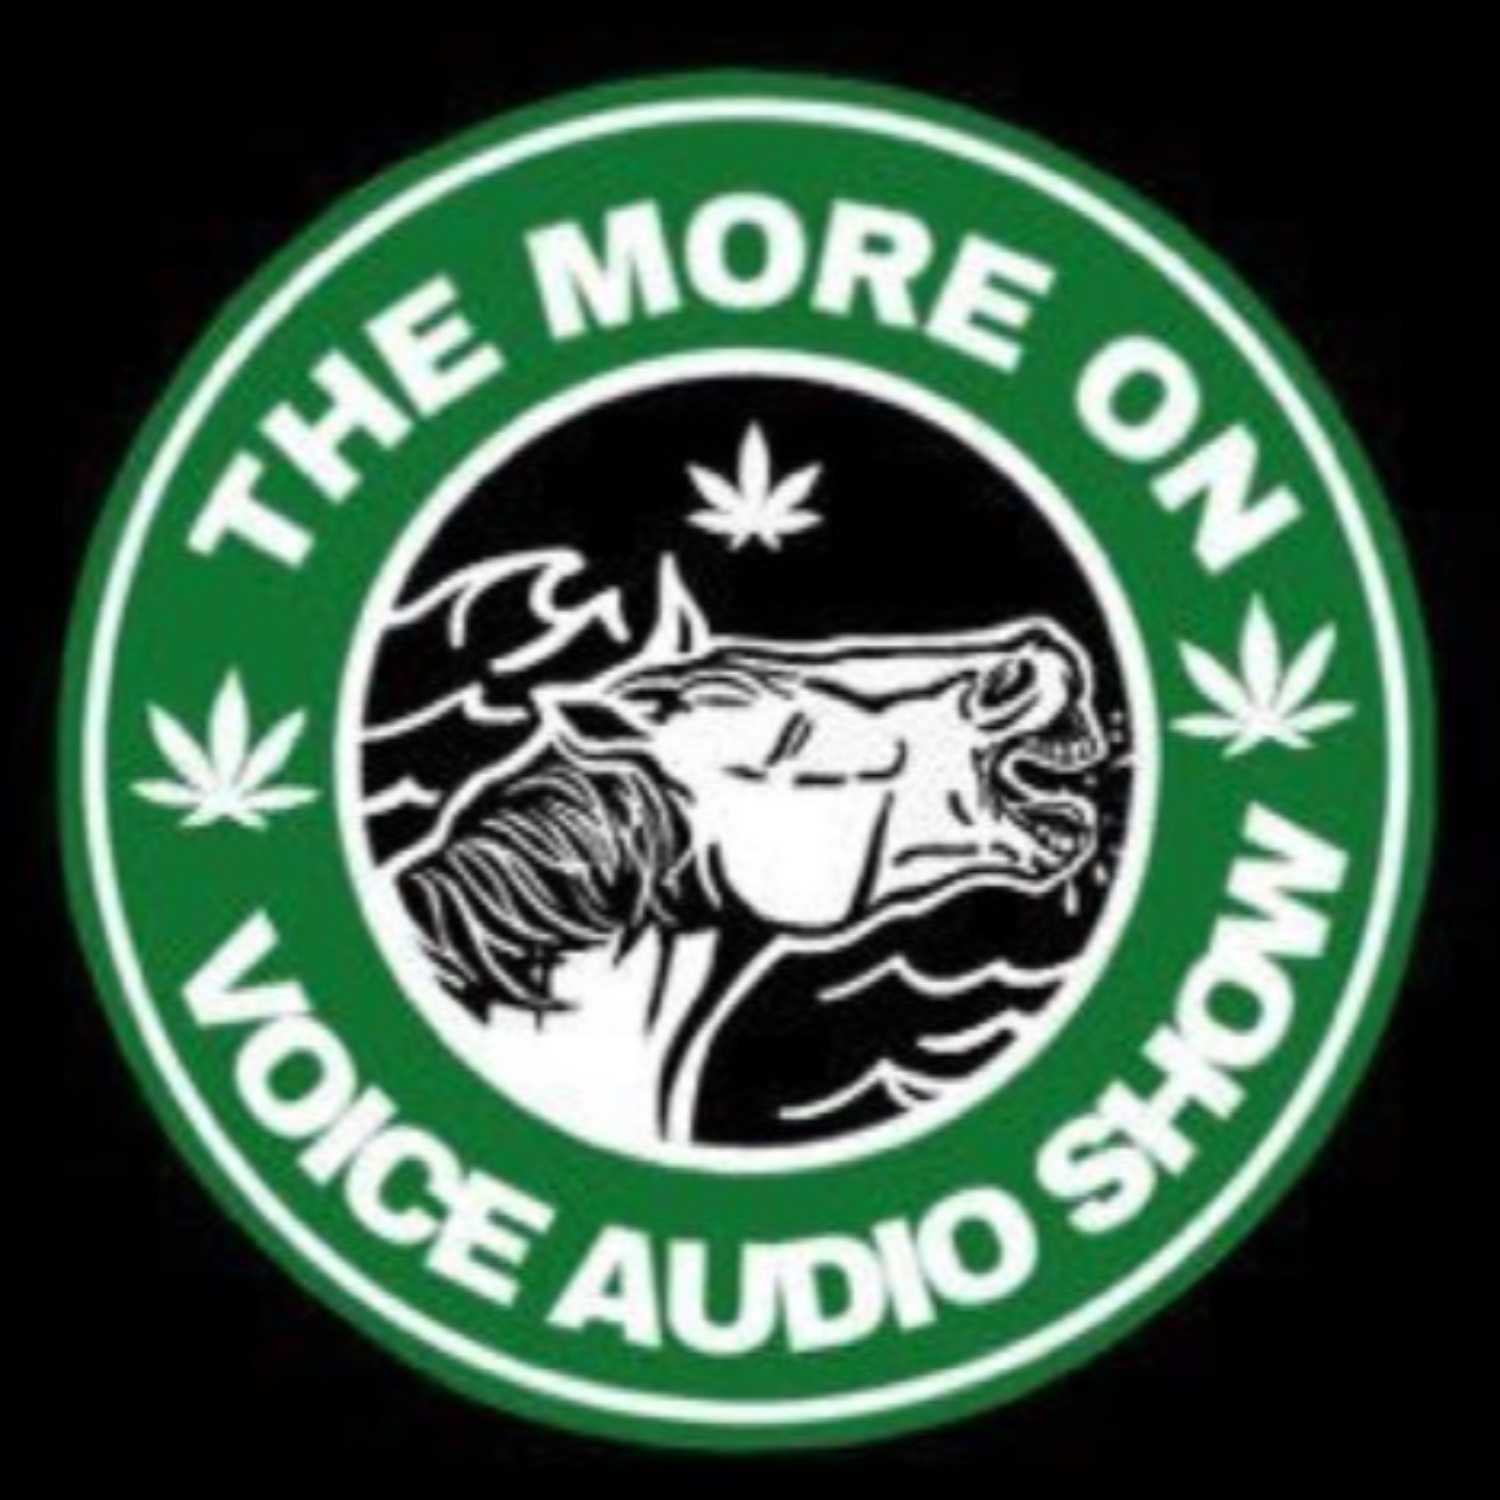 The More On Voice Audio Show: Episode 47